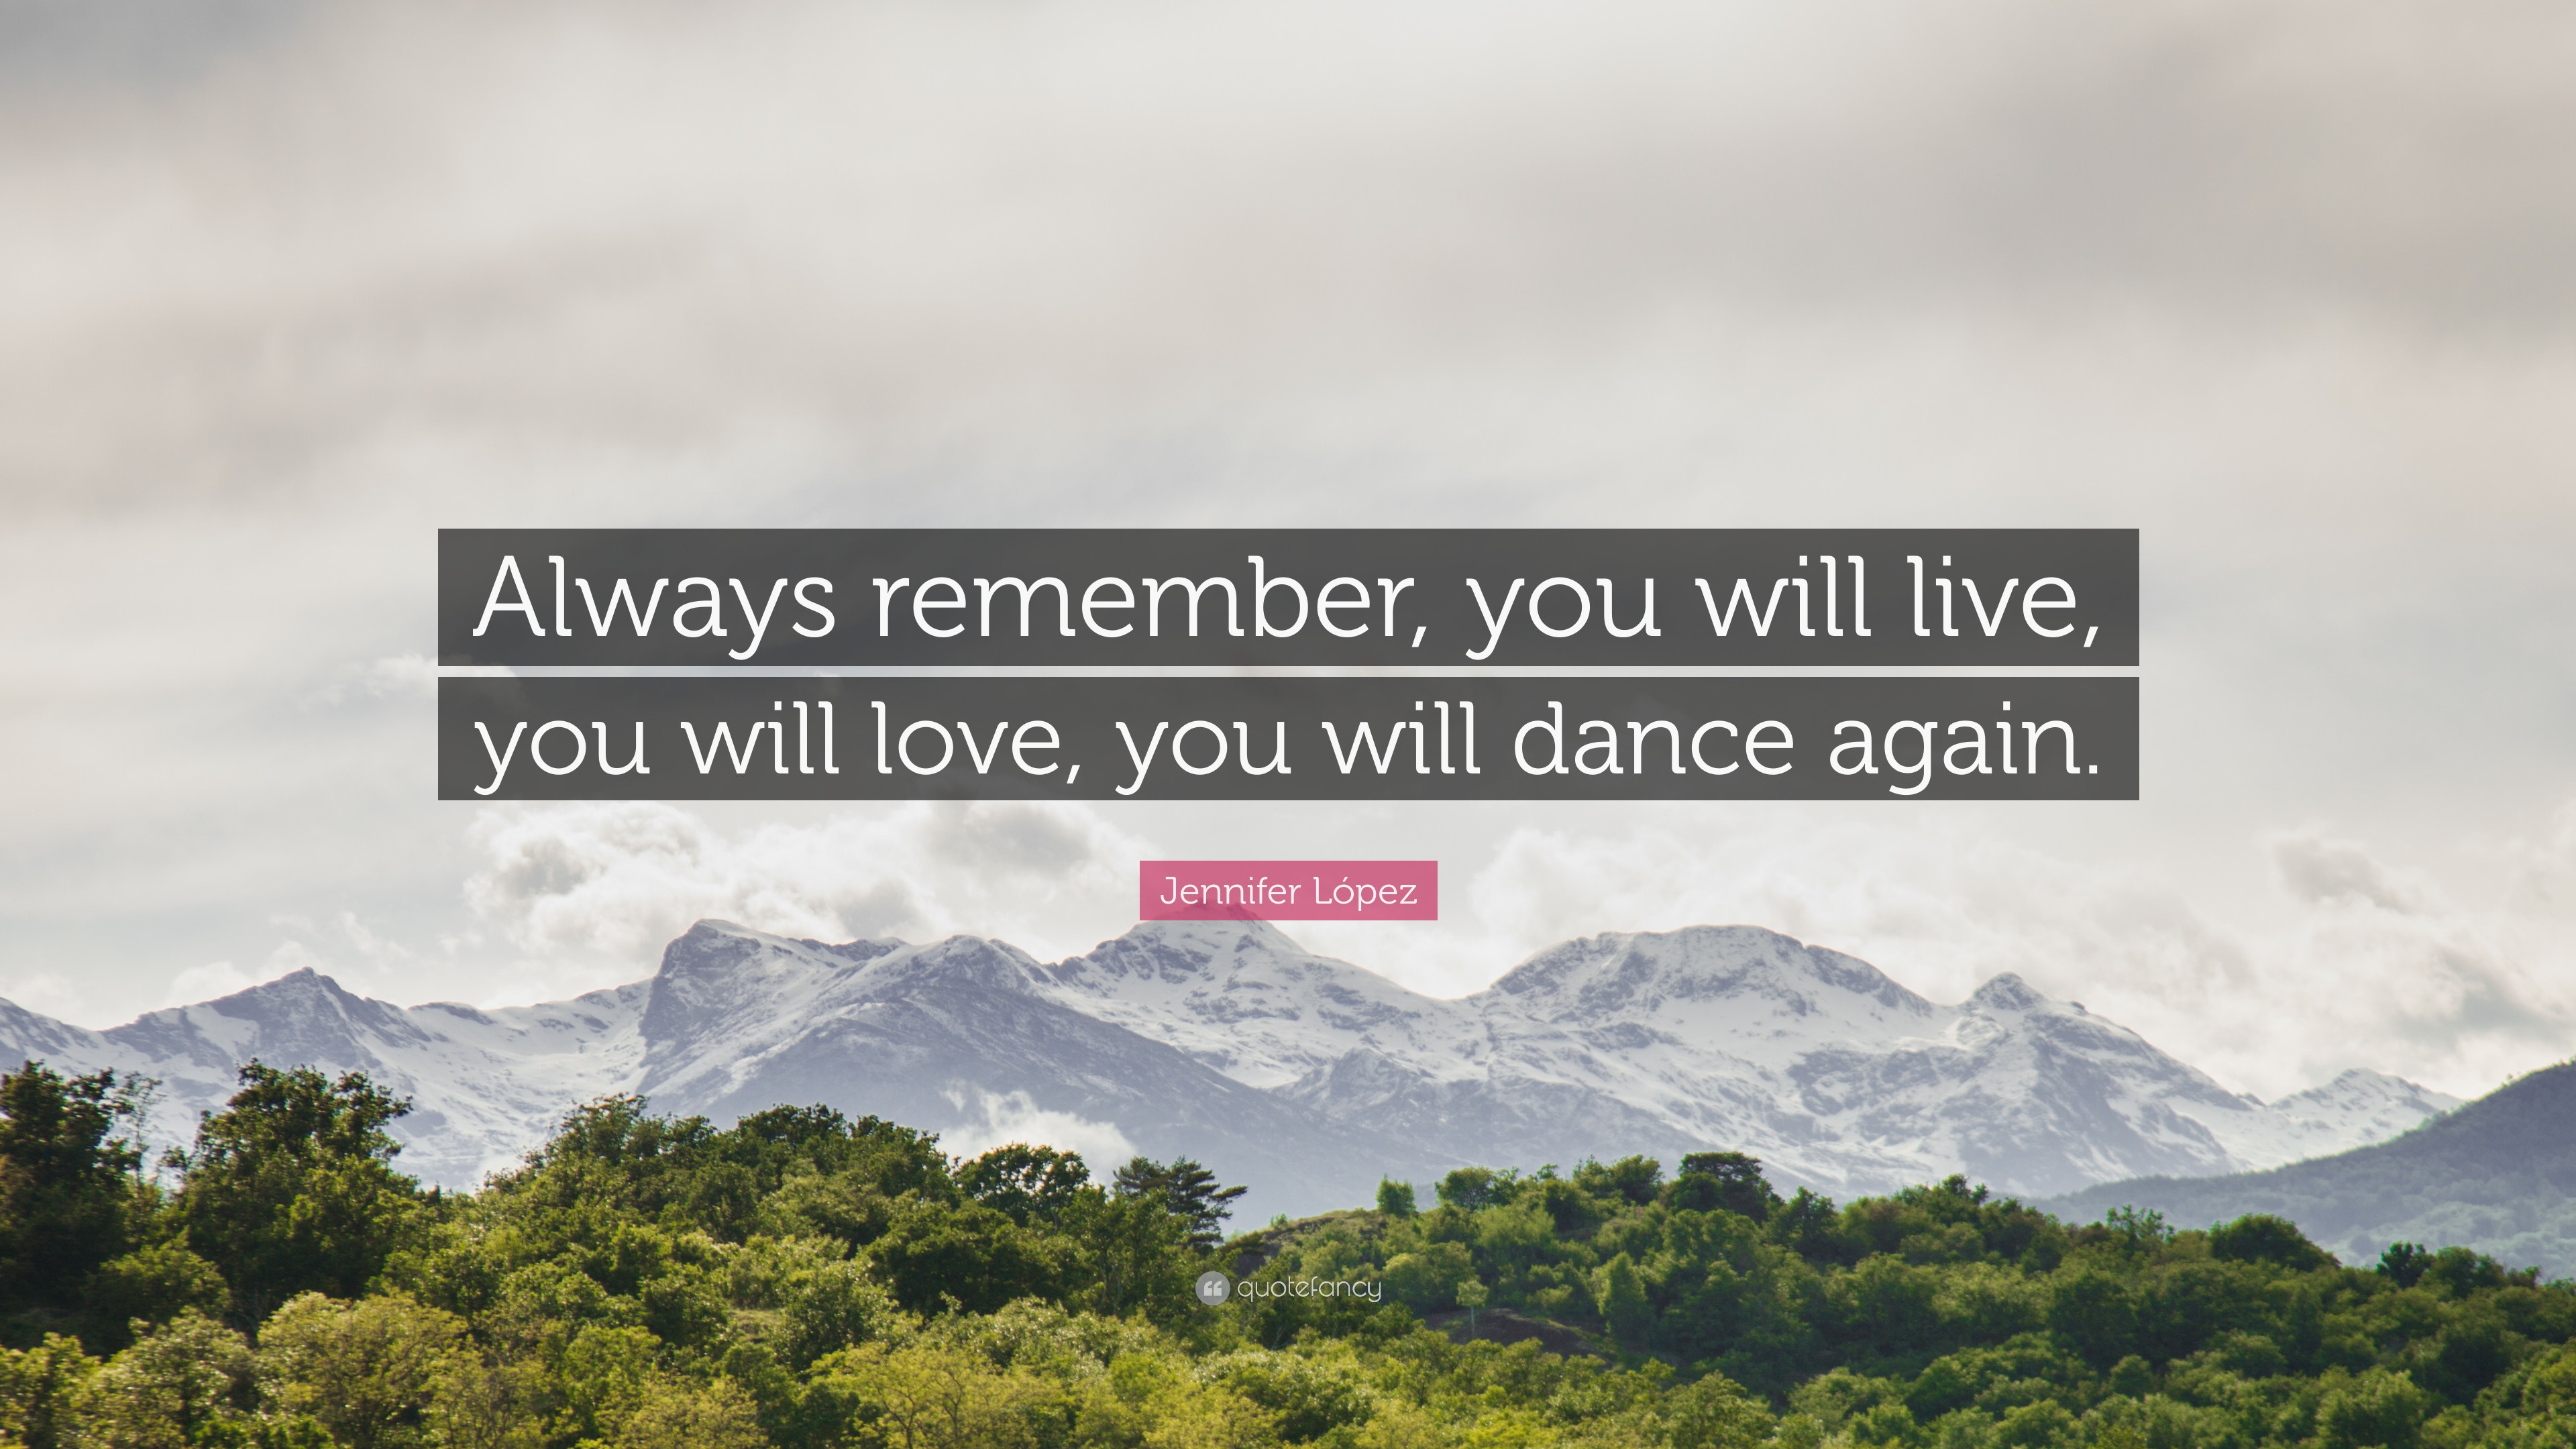 Jennifer L³pez Quote “Always remember you will live you will love